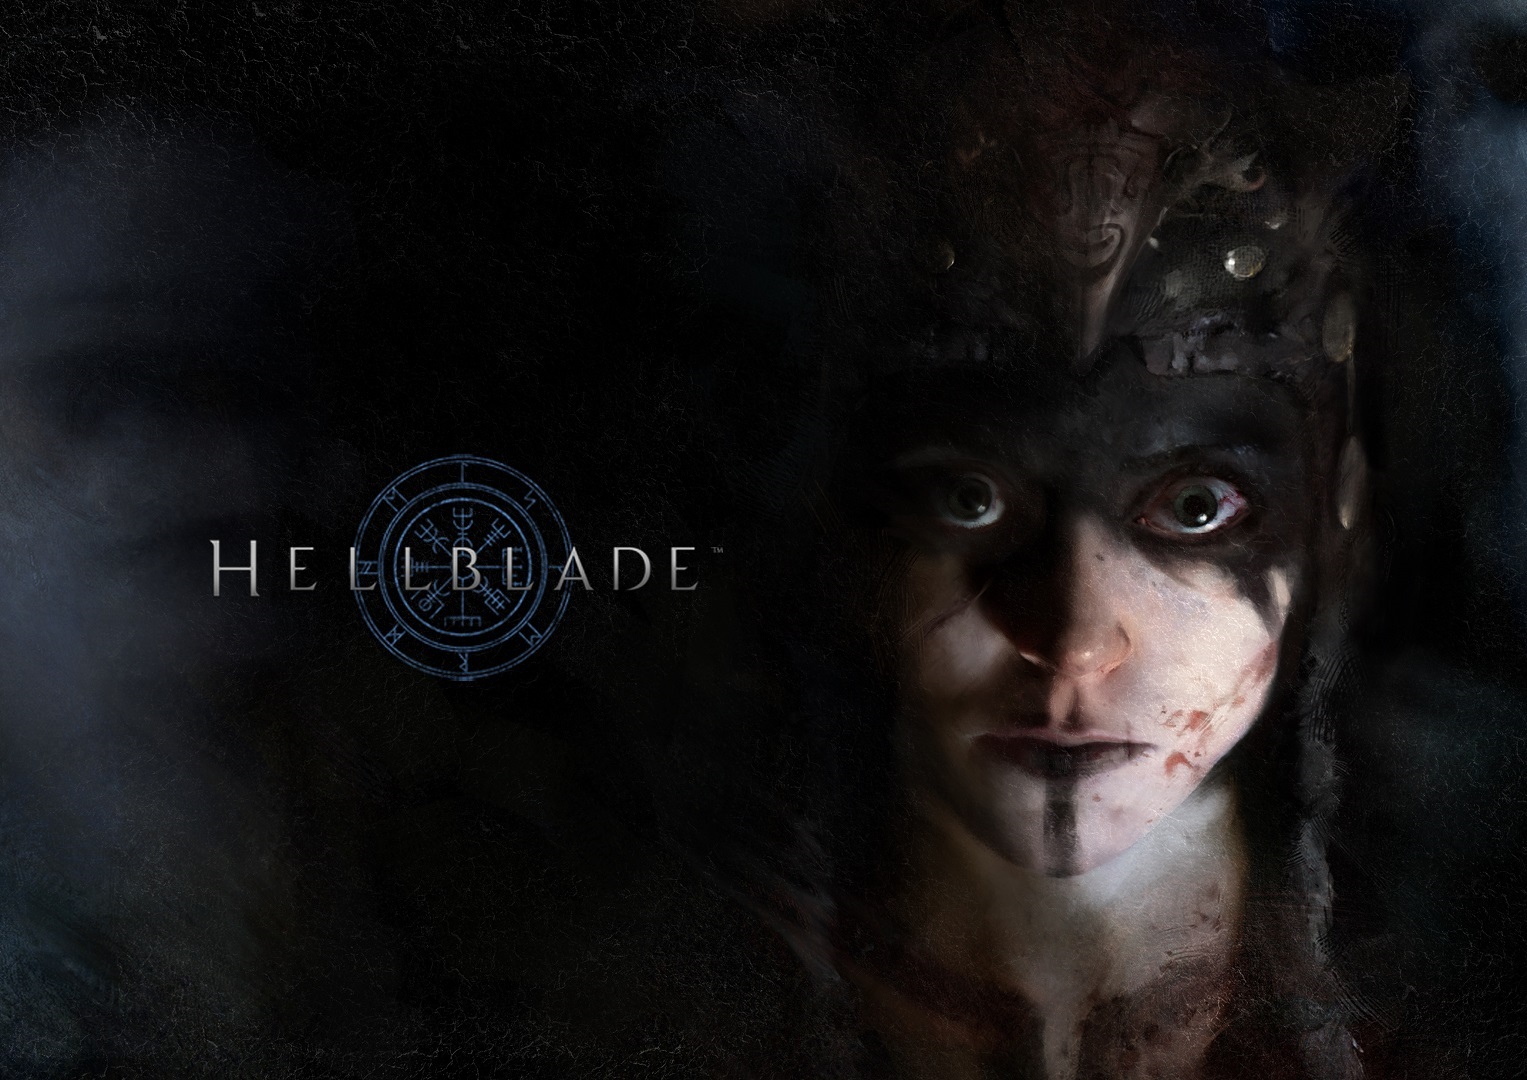 download hellblade 2 game for free